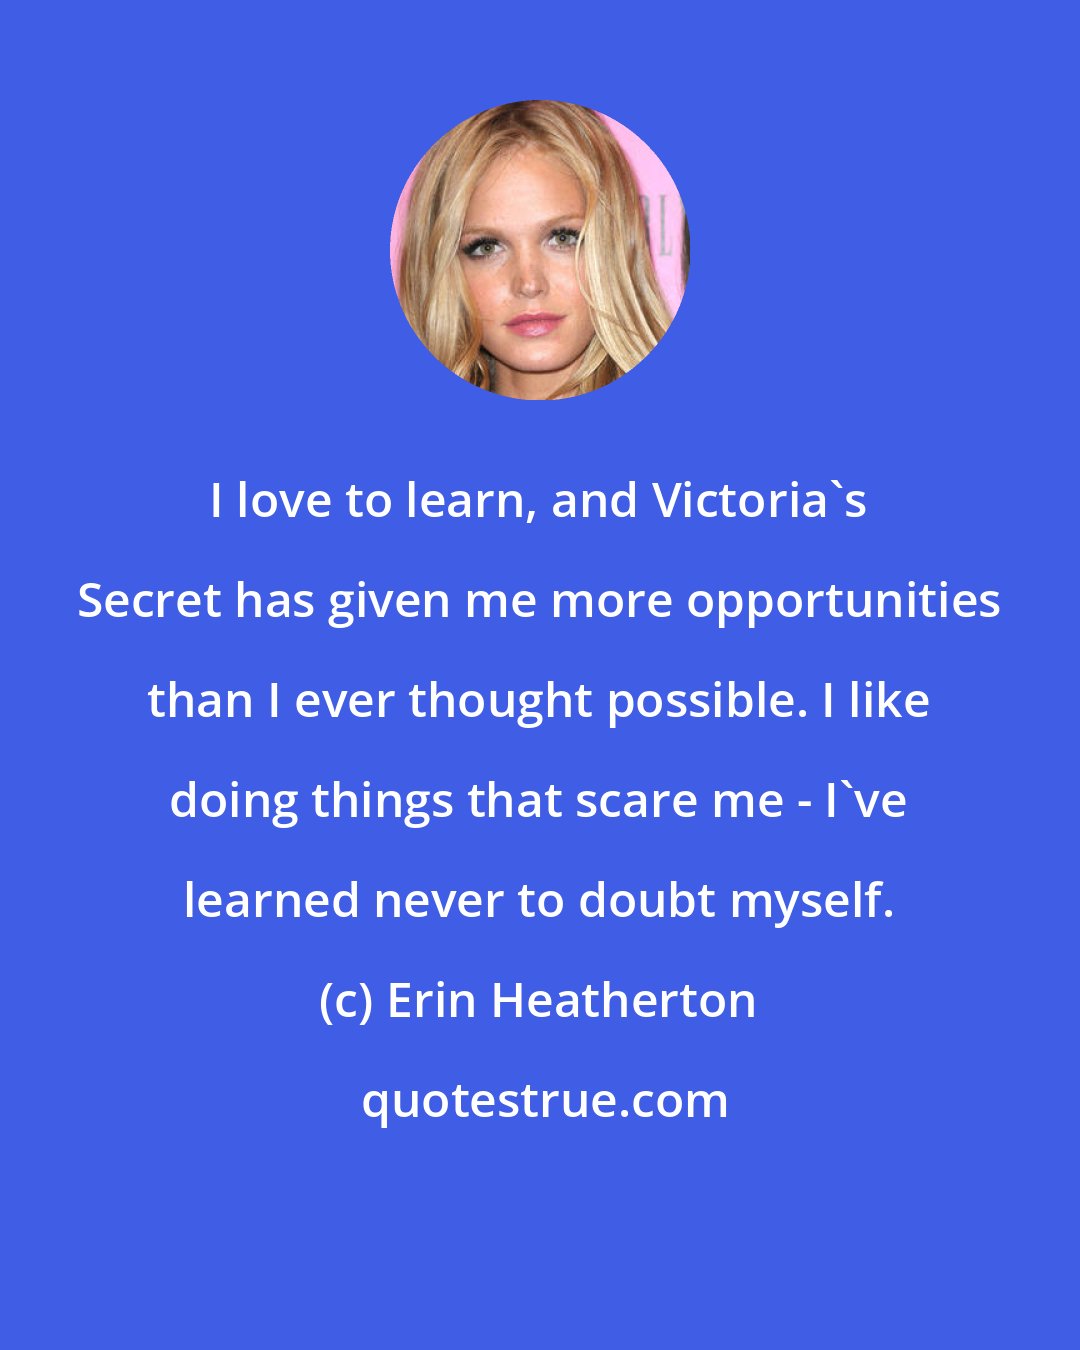 Erin Heatherton: I love to learn, and Victoria's Secret has given me more opportunities than I ever thought possible. I like doing things that scare me - I've learned never to doubt myself.